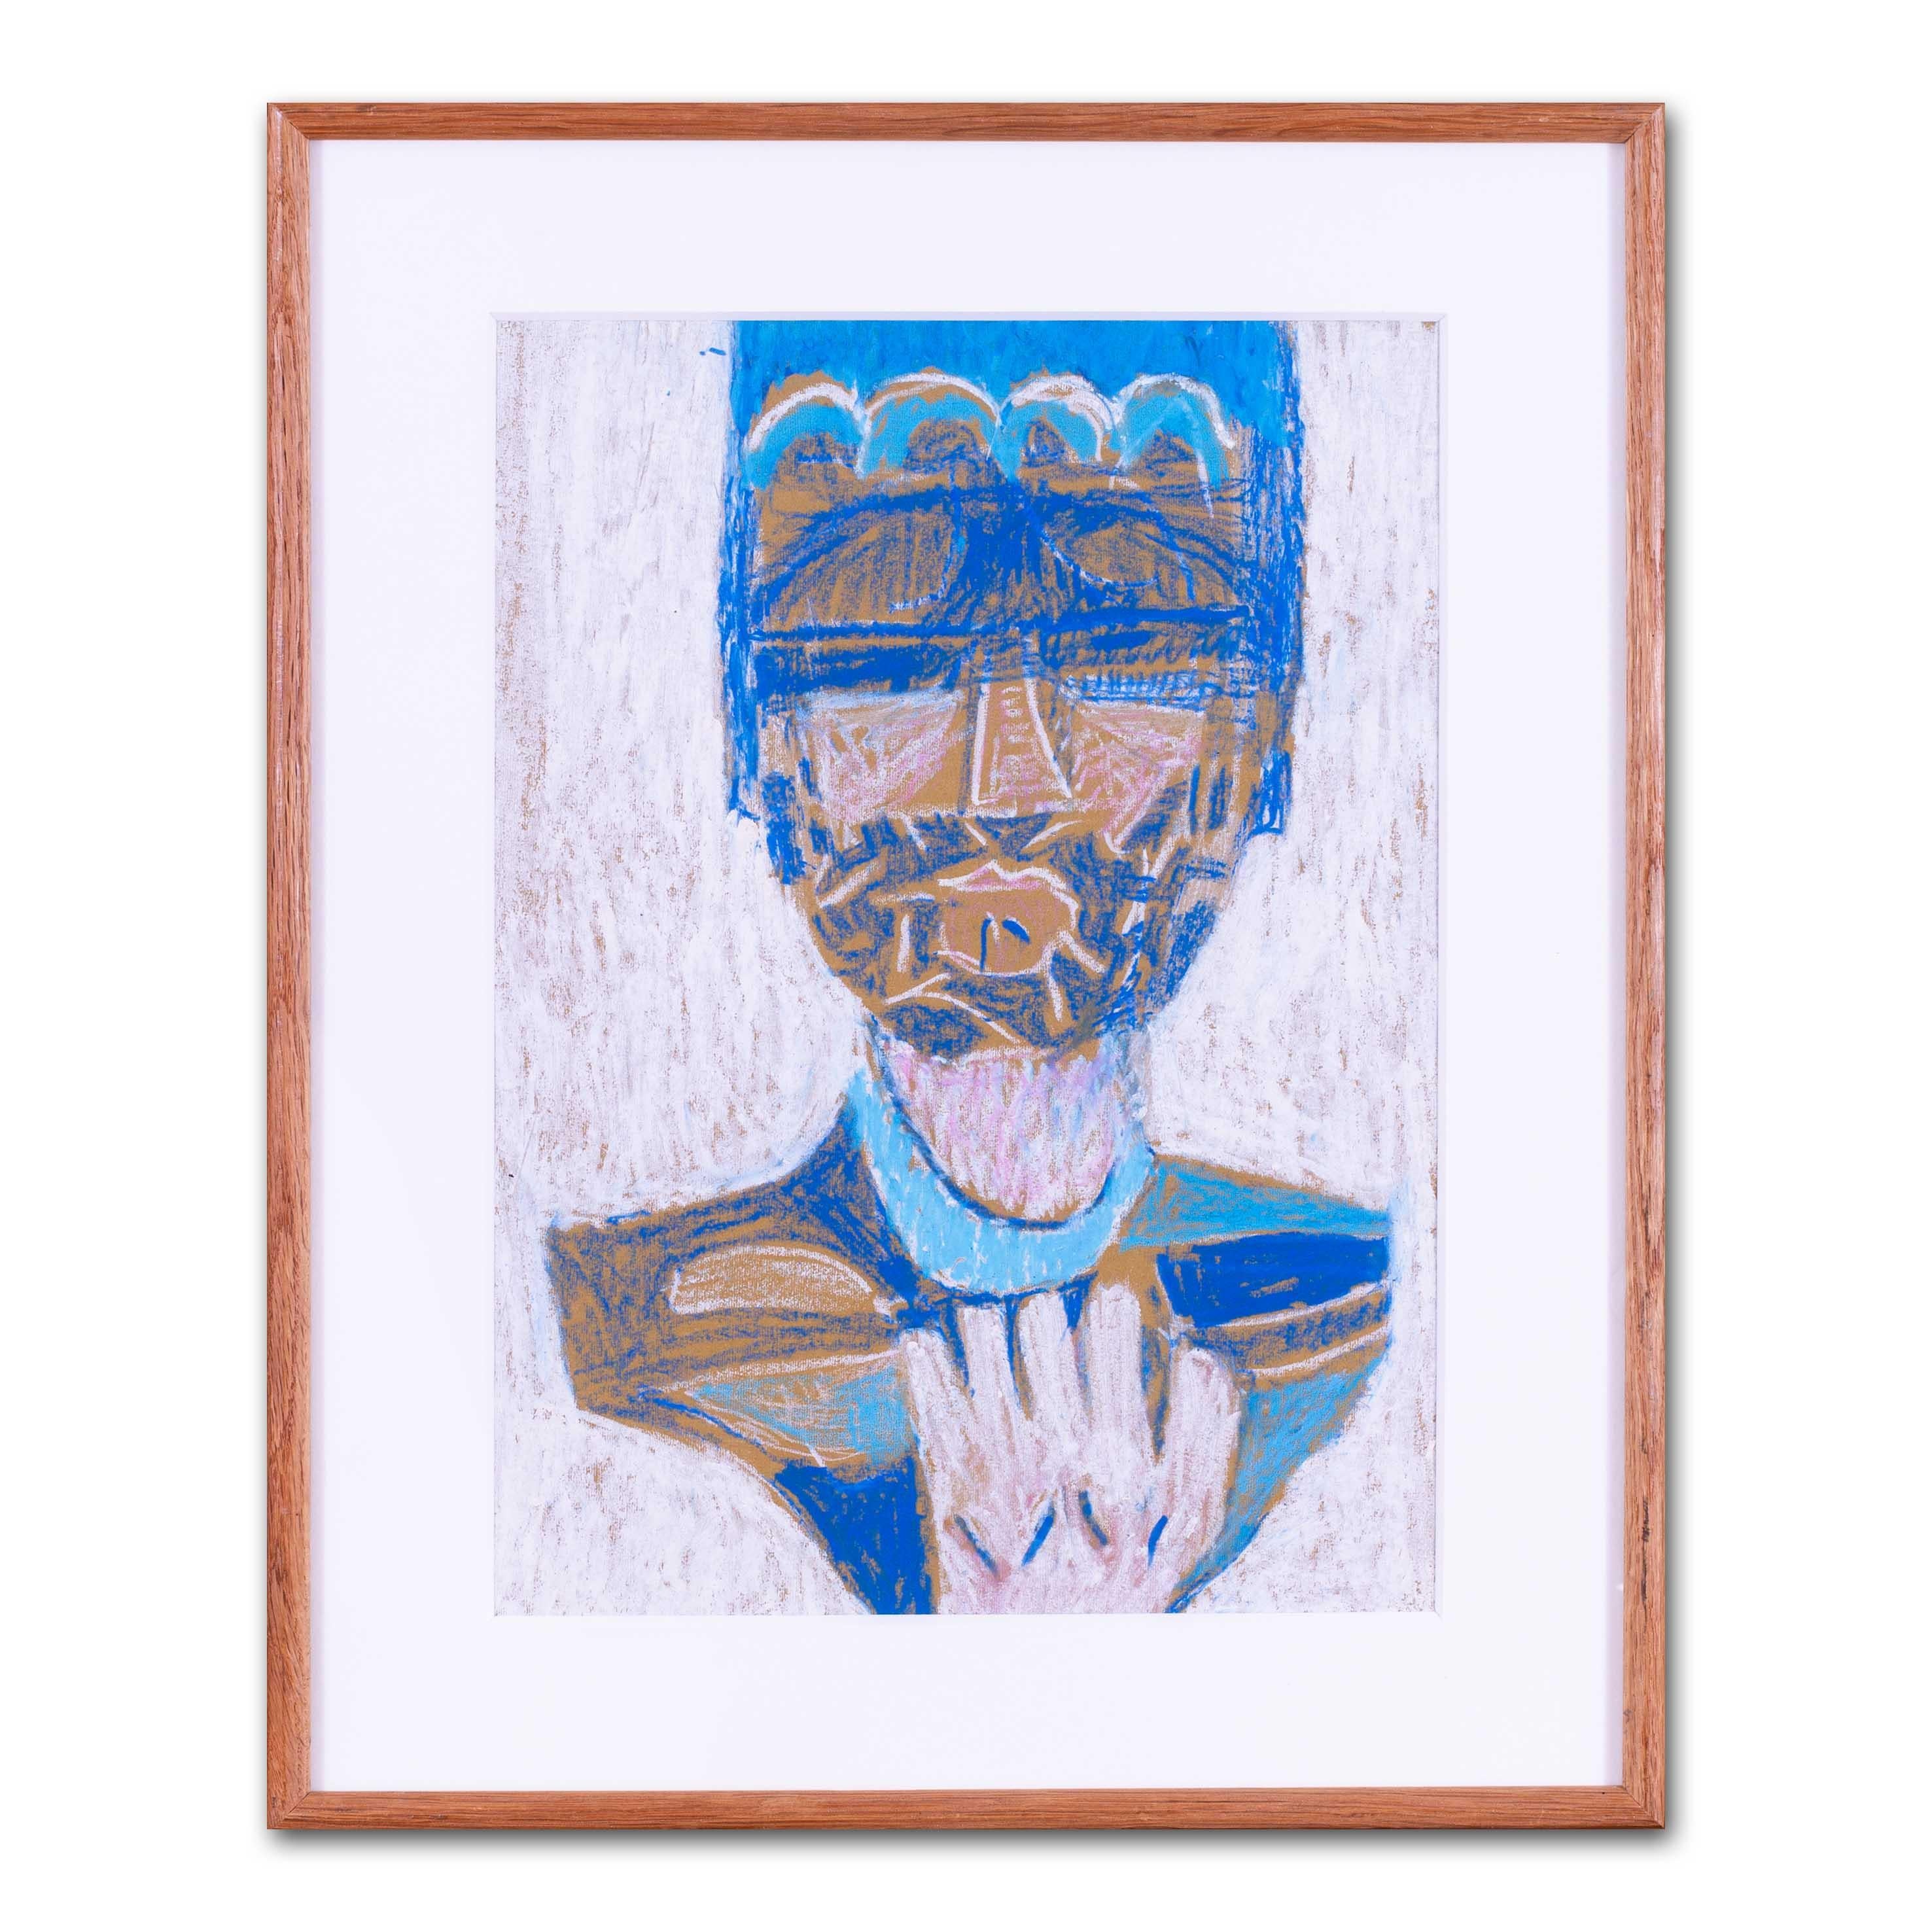 This mythological abstract portrait, 'Blue Deity', uses rich shades of blue to contrast with the white pastel against the paper. The figure wears an elaborate and exotic headdress, accentuated by bright and piercing blues. A hand reaches up as if to